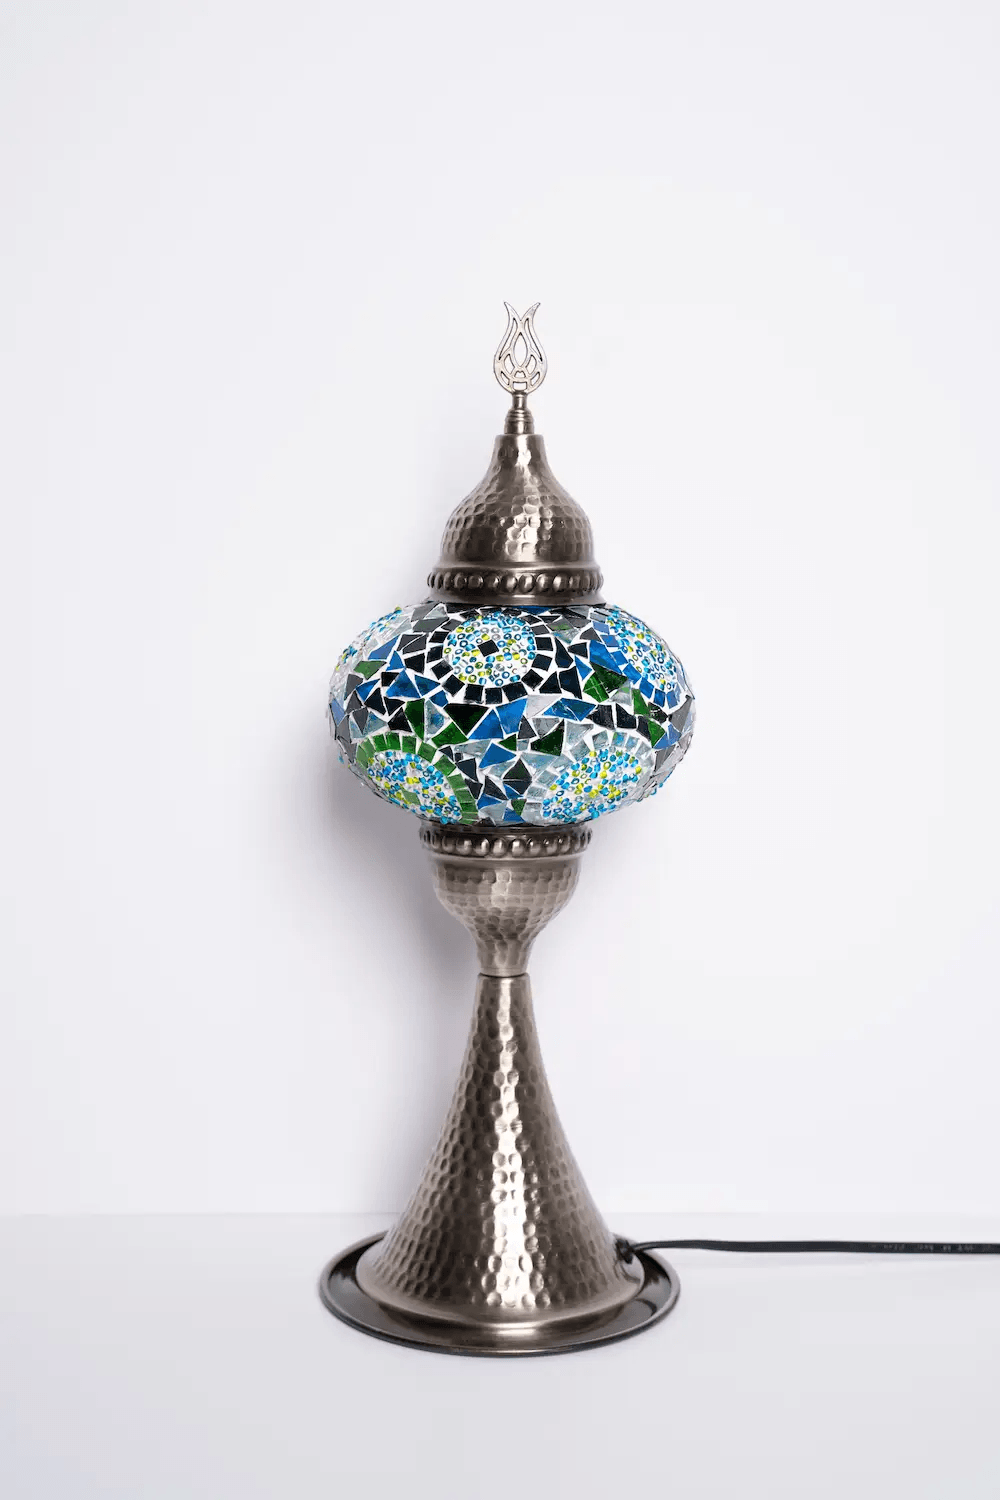 Elite Turkish Mosaic Glass Decorative Table Lamps - Turquoise Separated Circles - Unique Custom Moroccan Lamp Shades - KAFTHAN